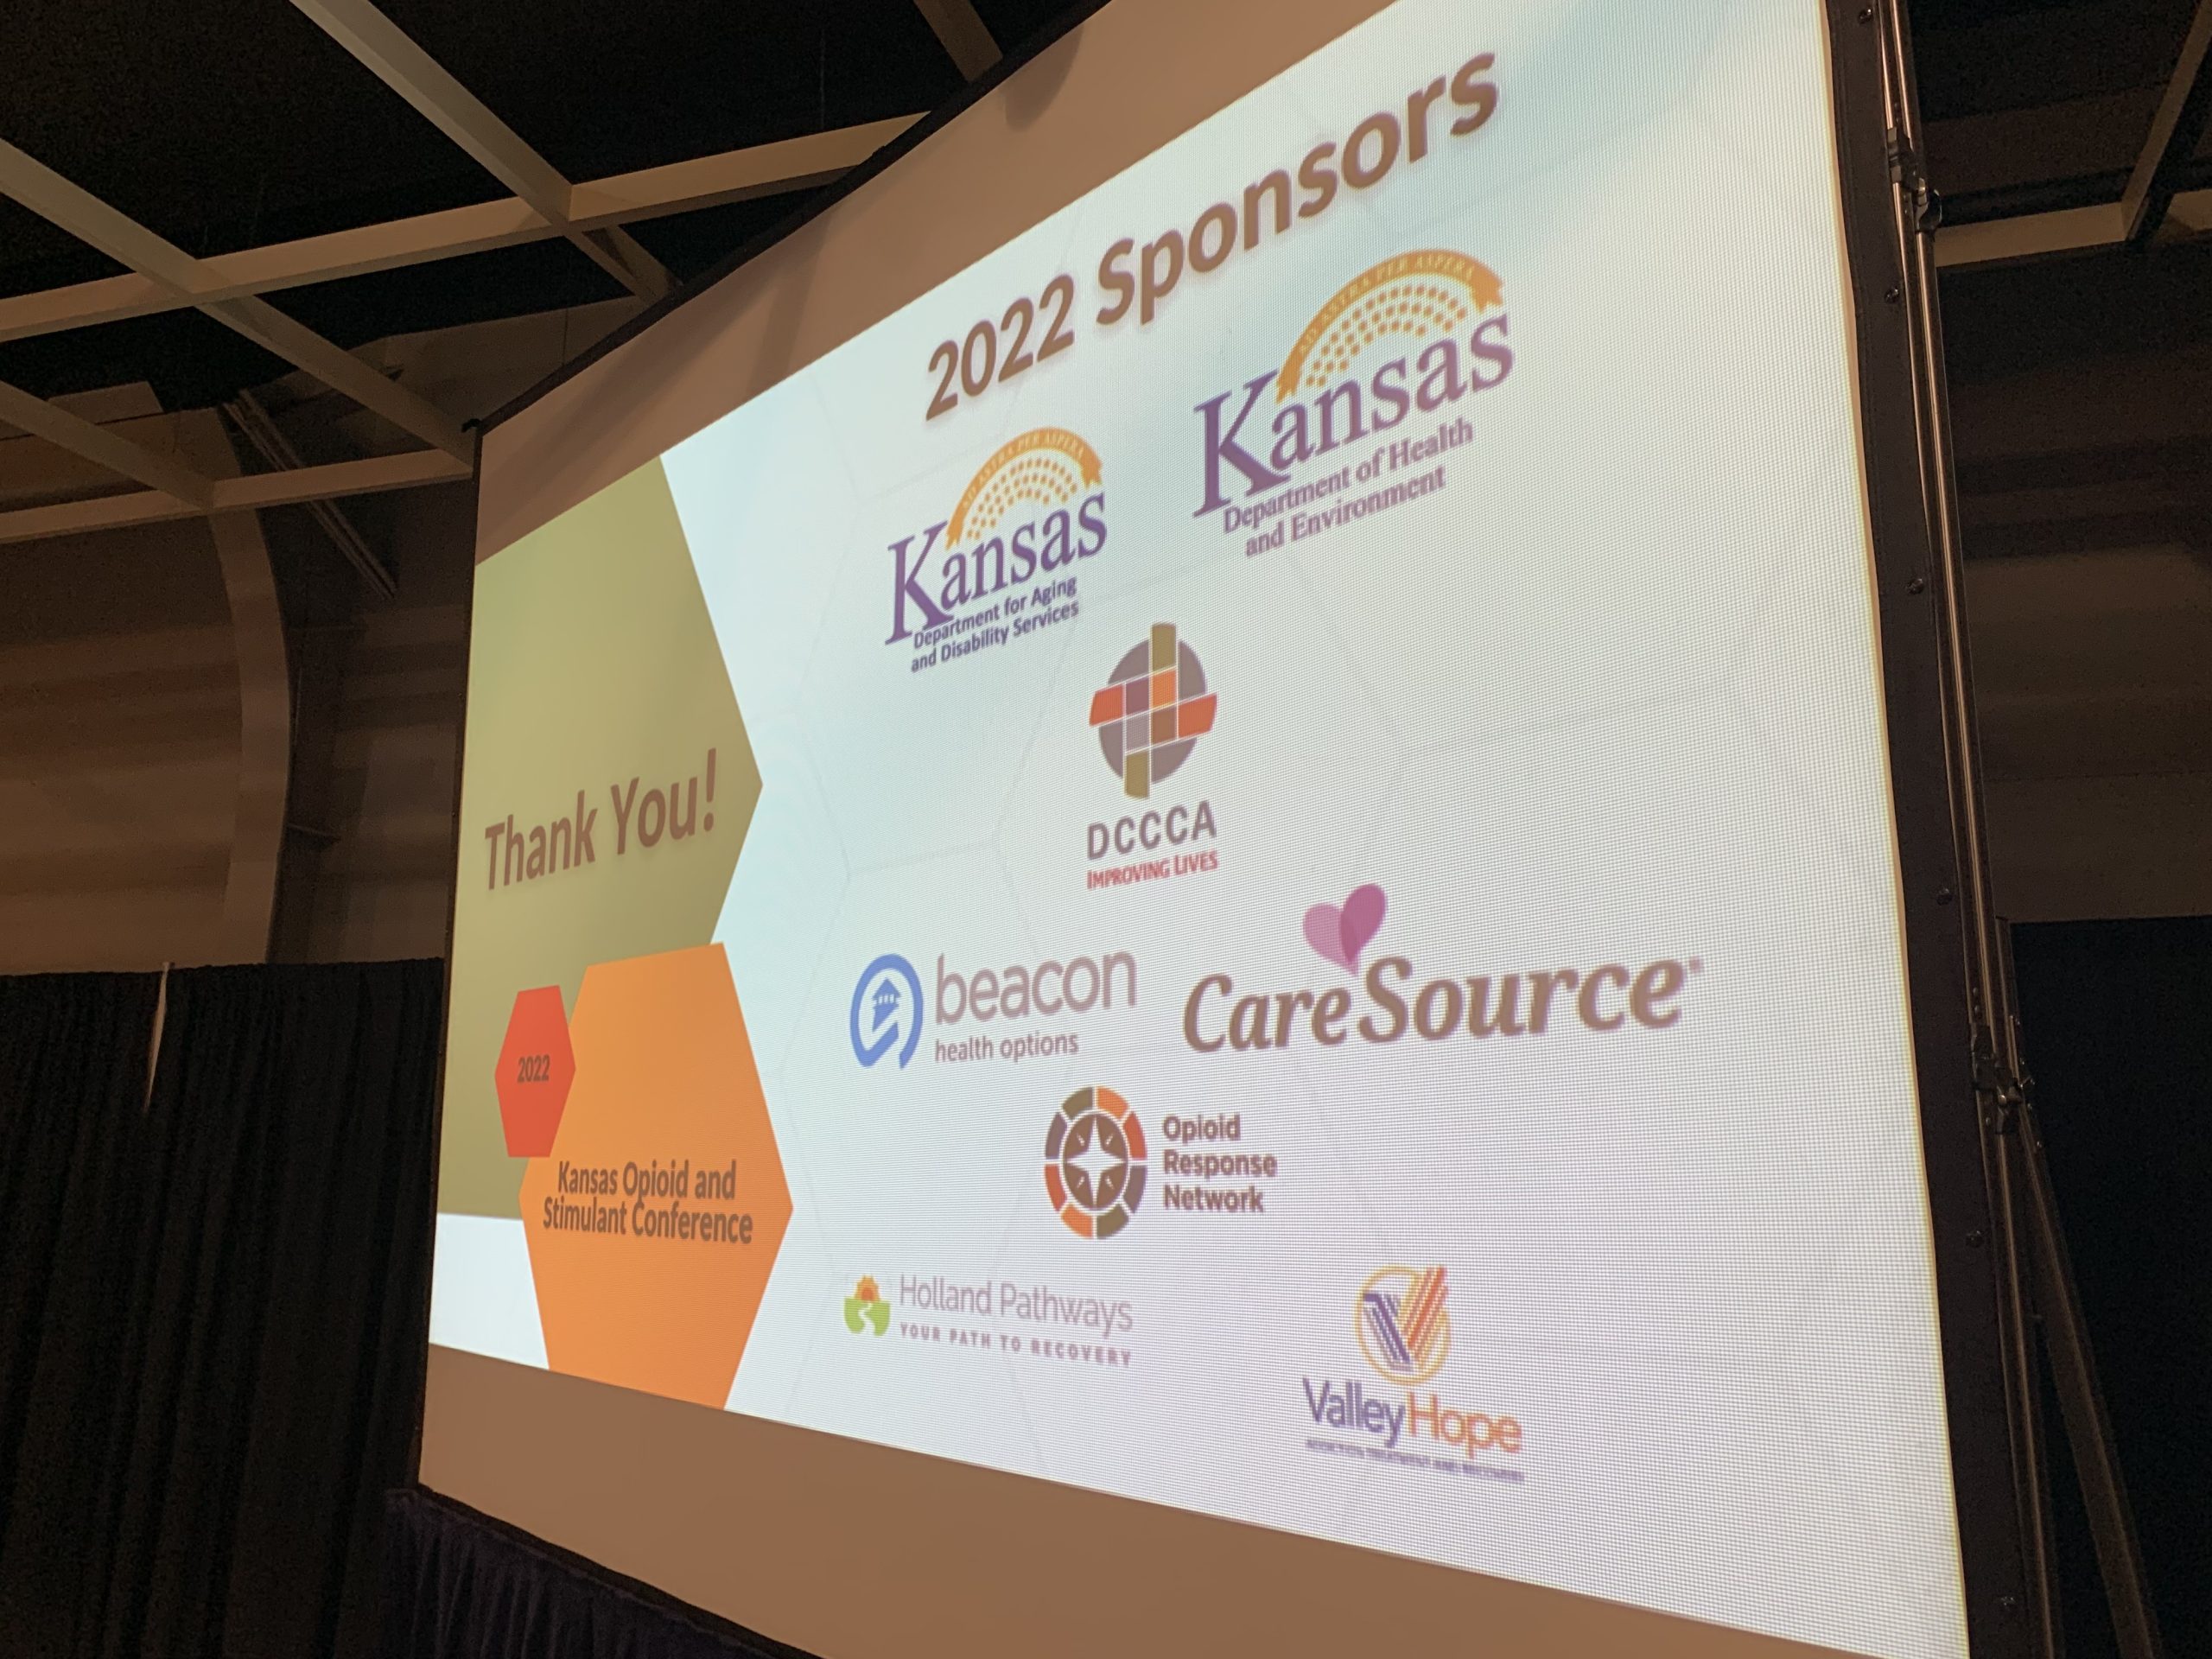 2022 Kansas Opioid and Stimulant Conference